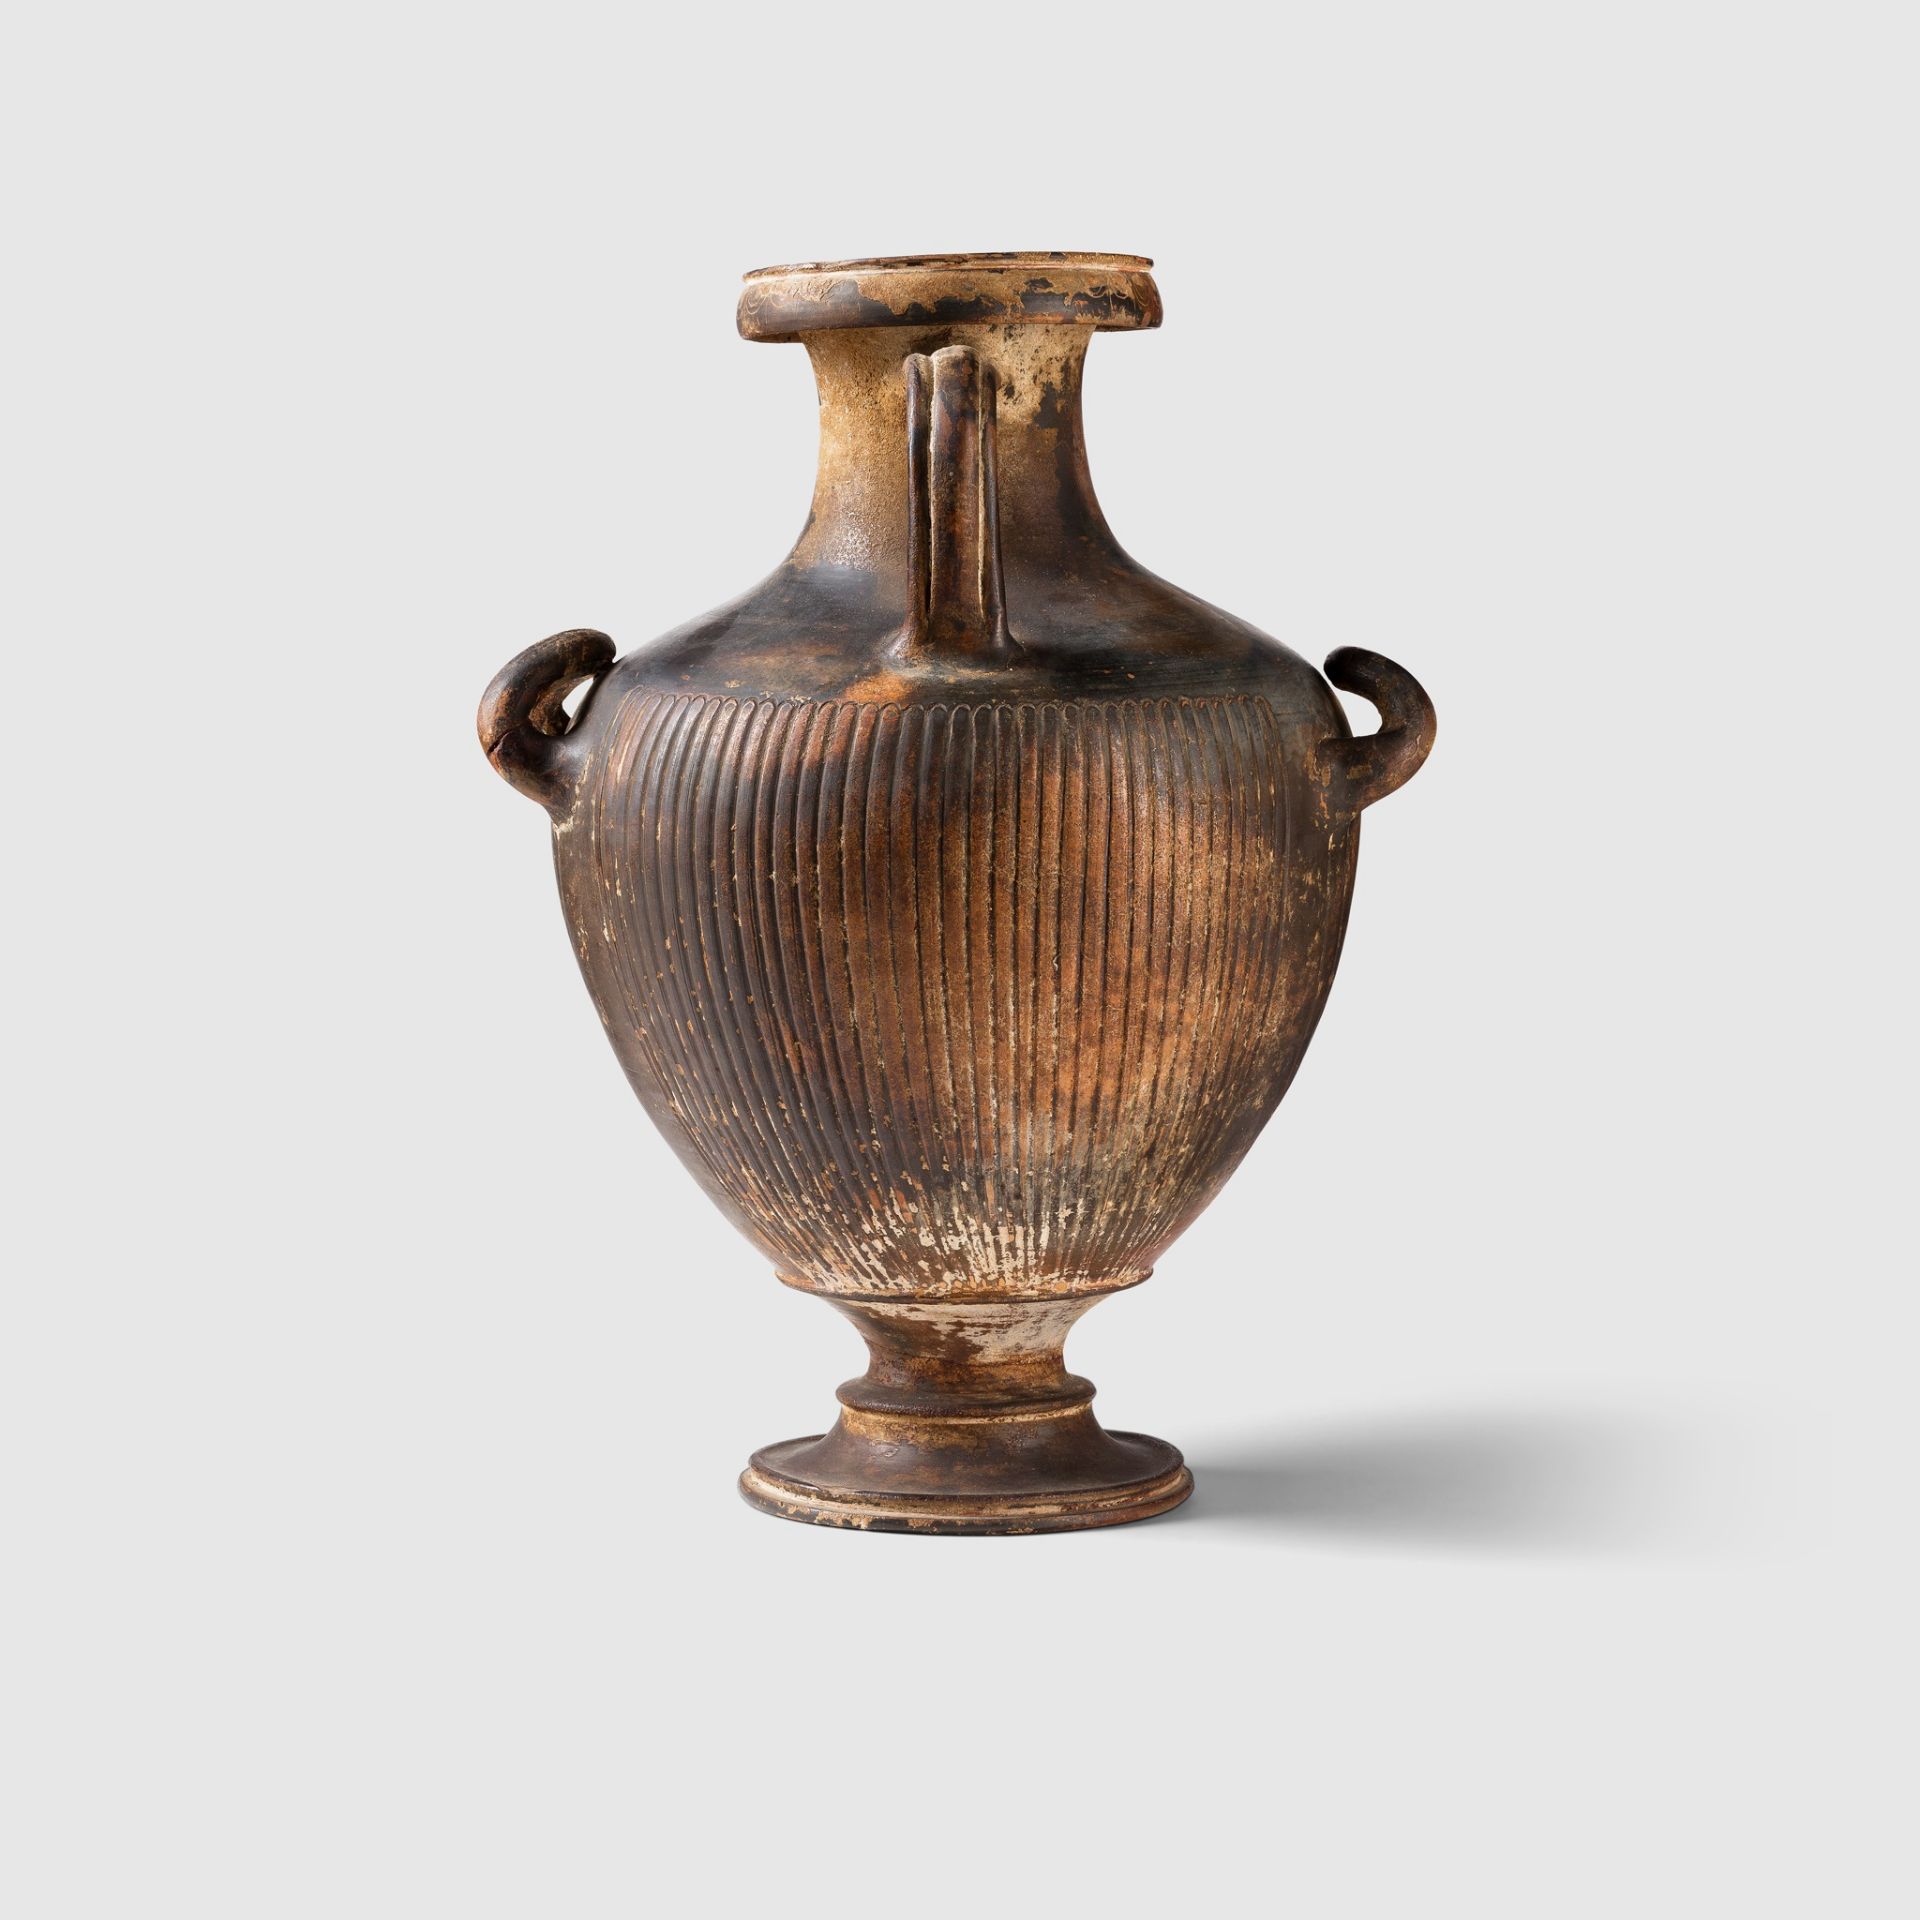 GNATHIAN WARE HYDRIA SOUTHERN ITALY, C. 3RD CENTURY B.C. - Image 3 of 4